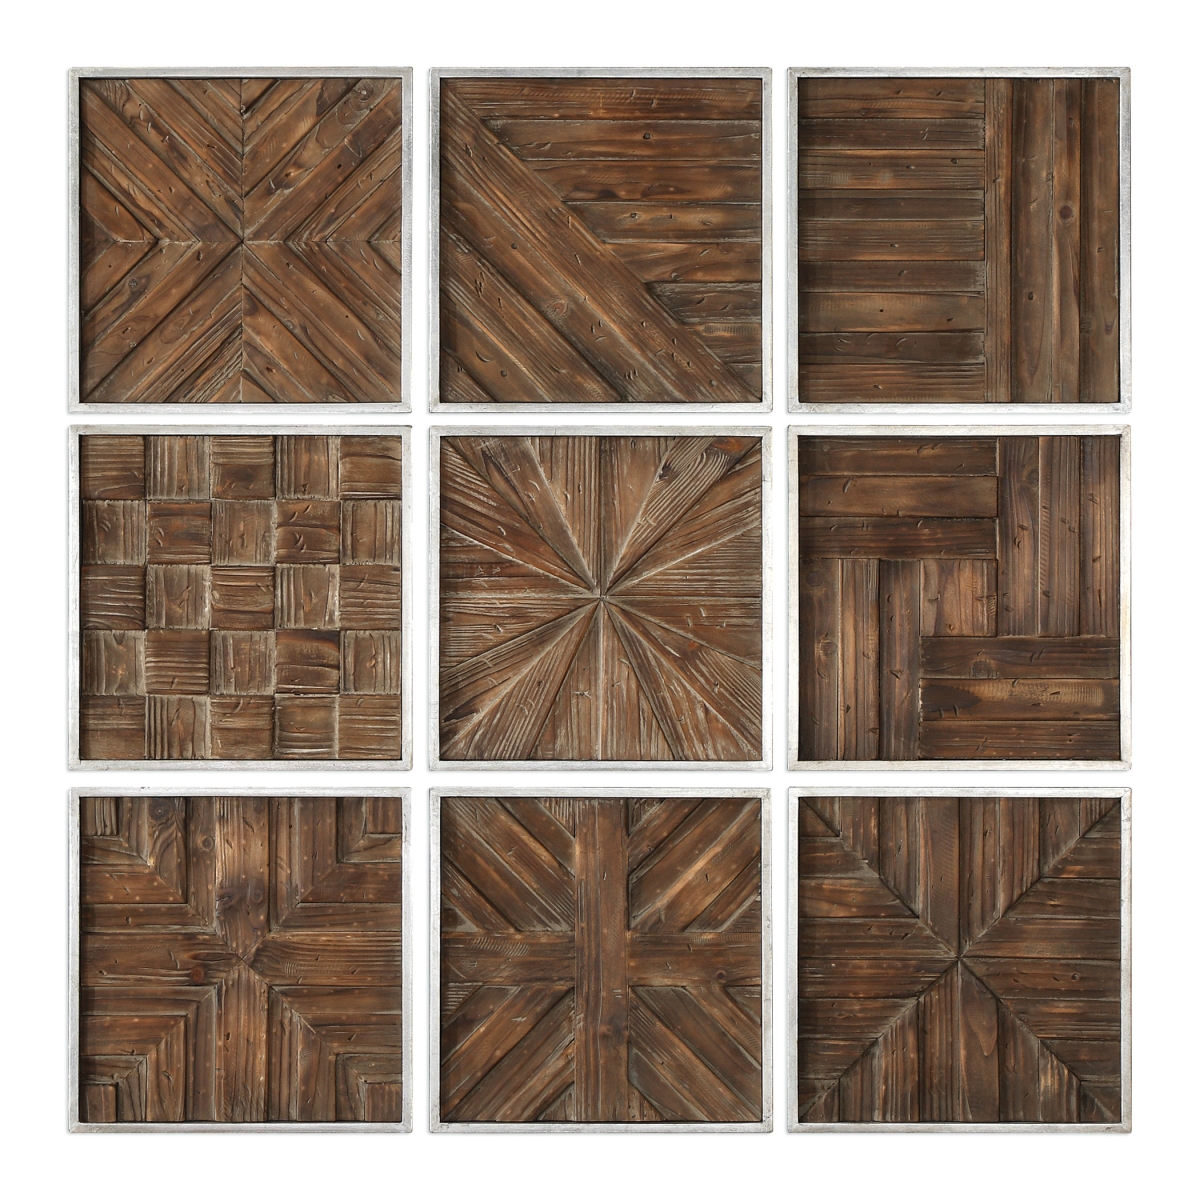 Picture of 212 Main 04115 Bryndle Rustic Wooden Squares  Set of 9